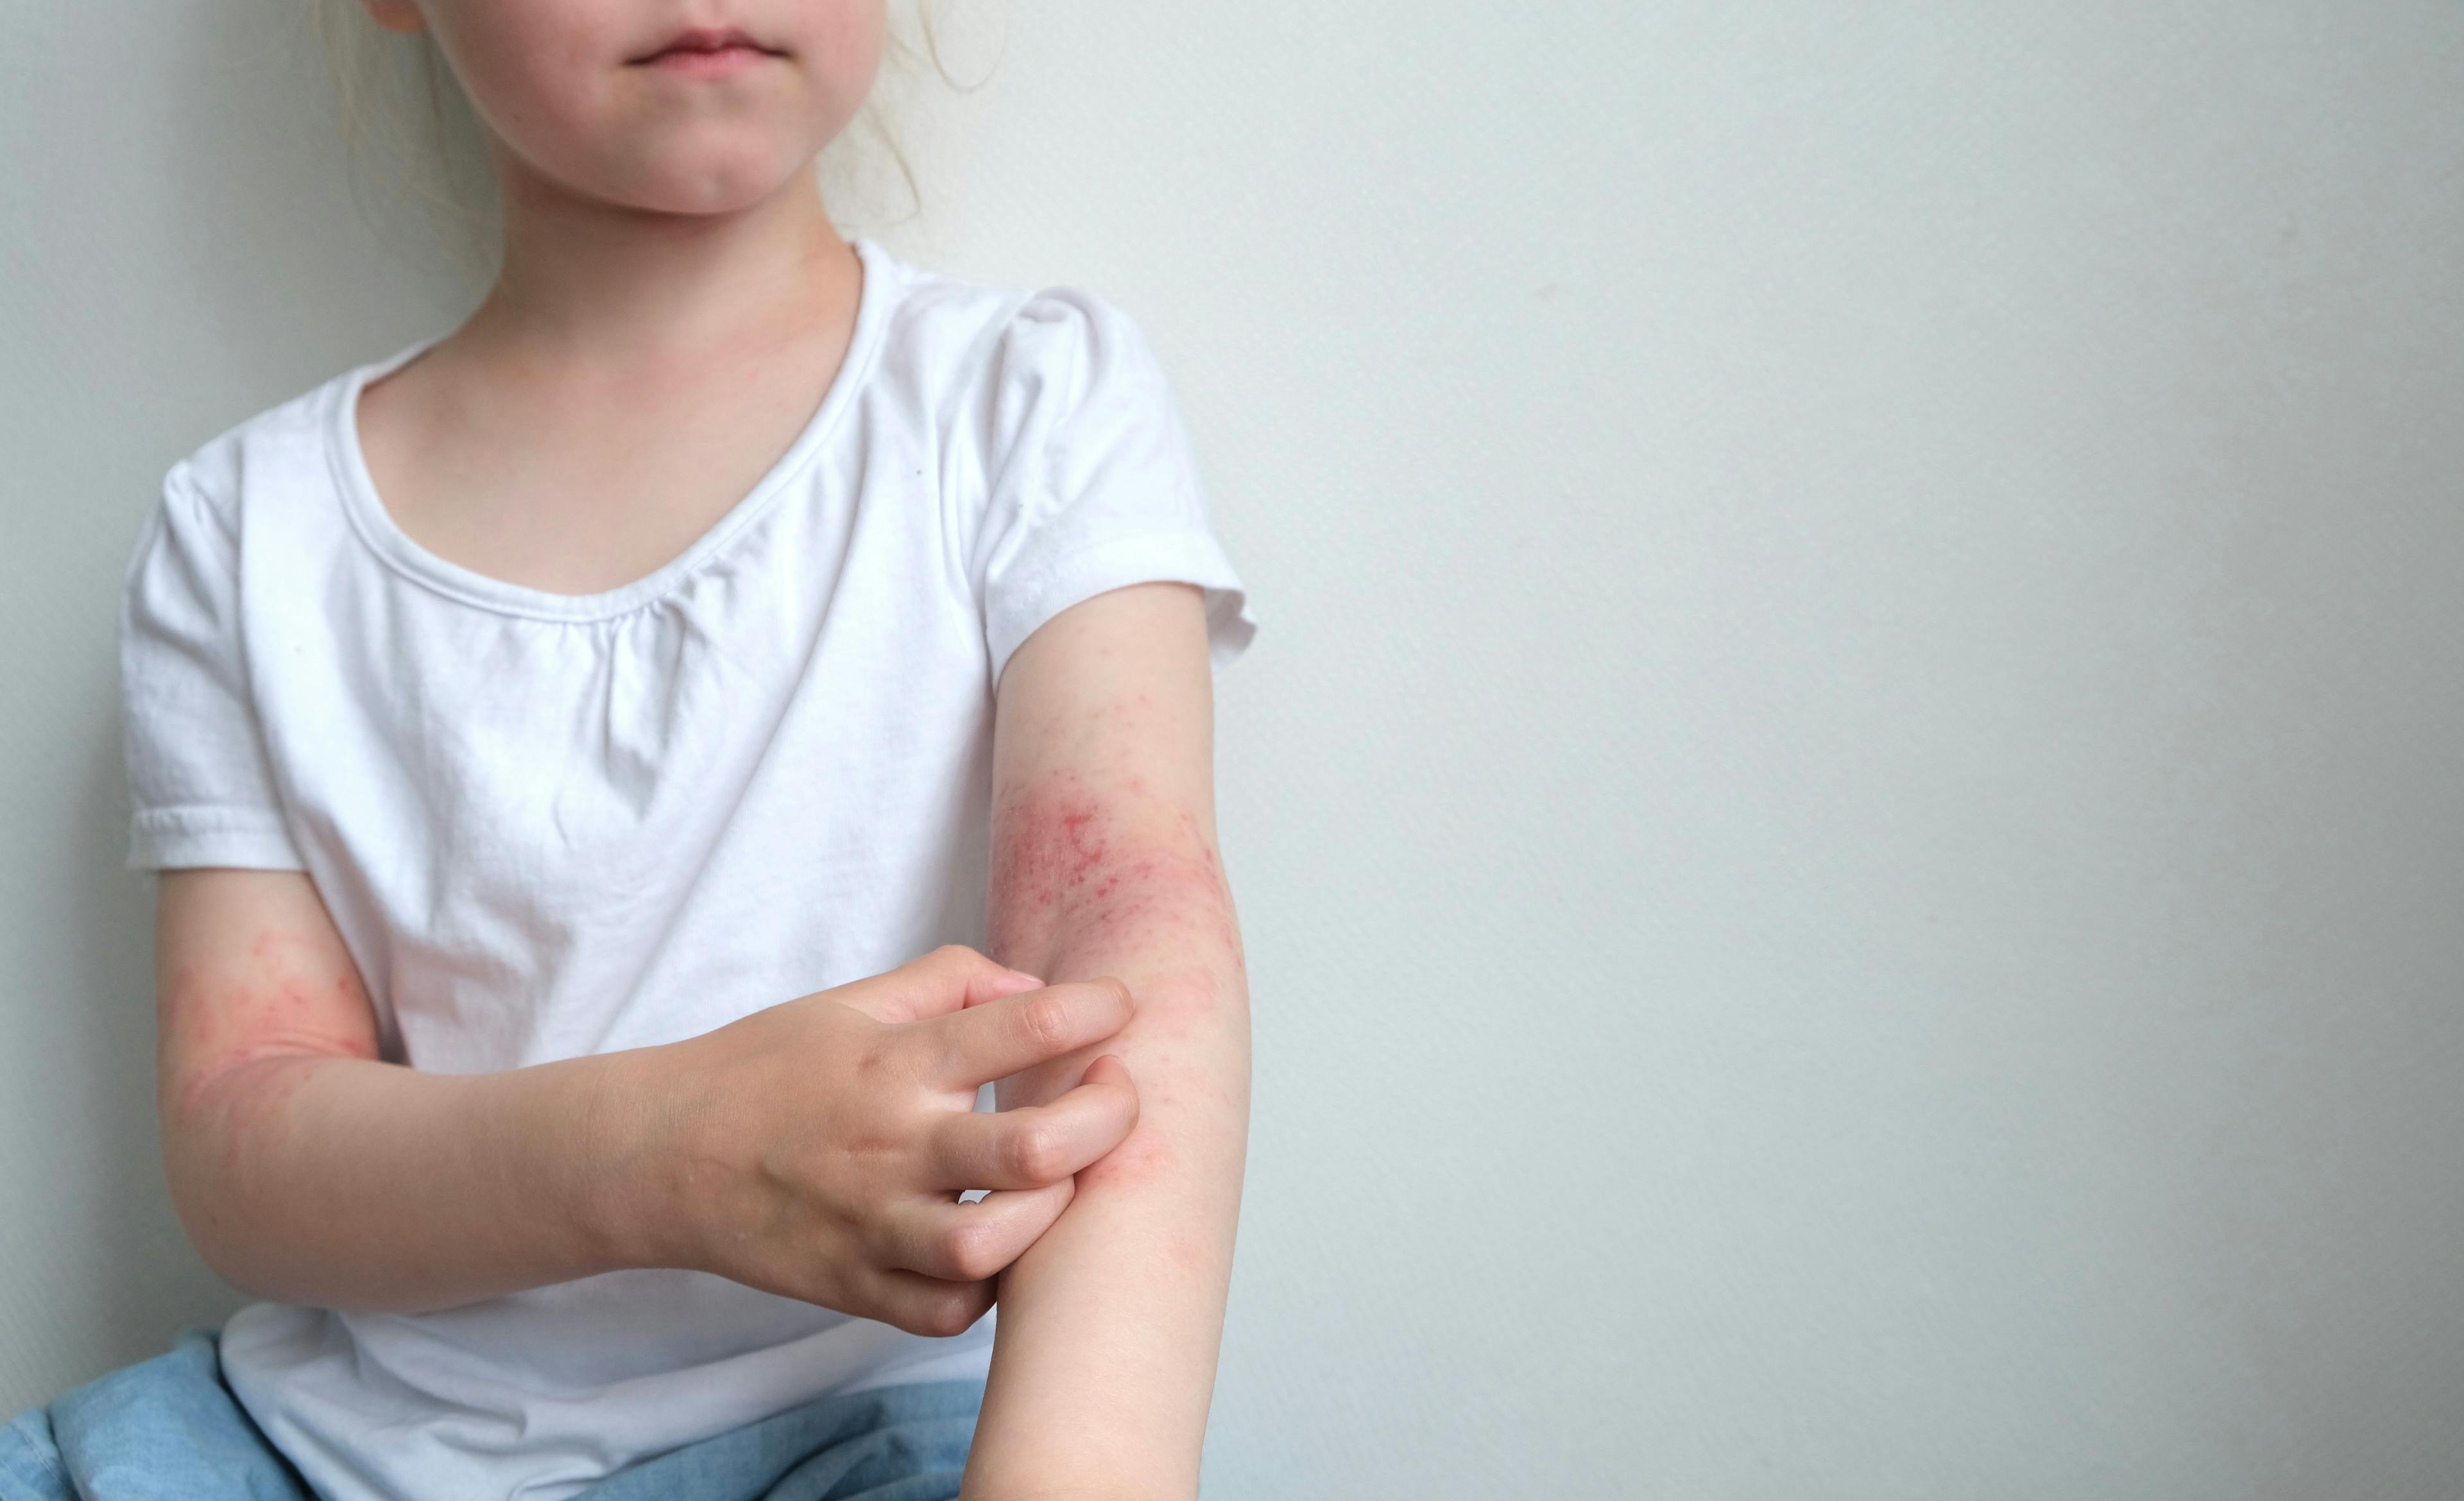 Prior to making a decision around systemic therapy, its key for clinicians to discuss which topical agents should be used at various states of eczema. Image Credit: © Марина Терехова - stock.adobe.com